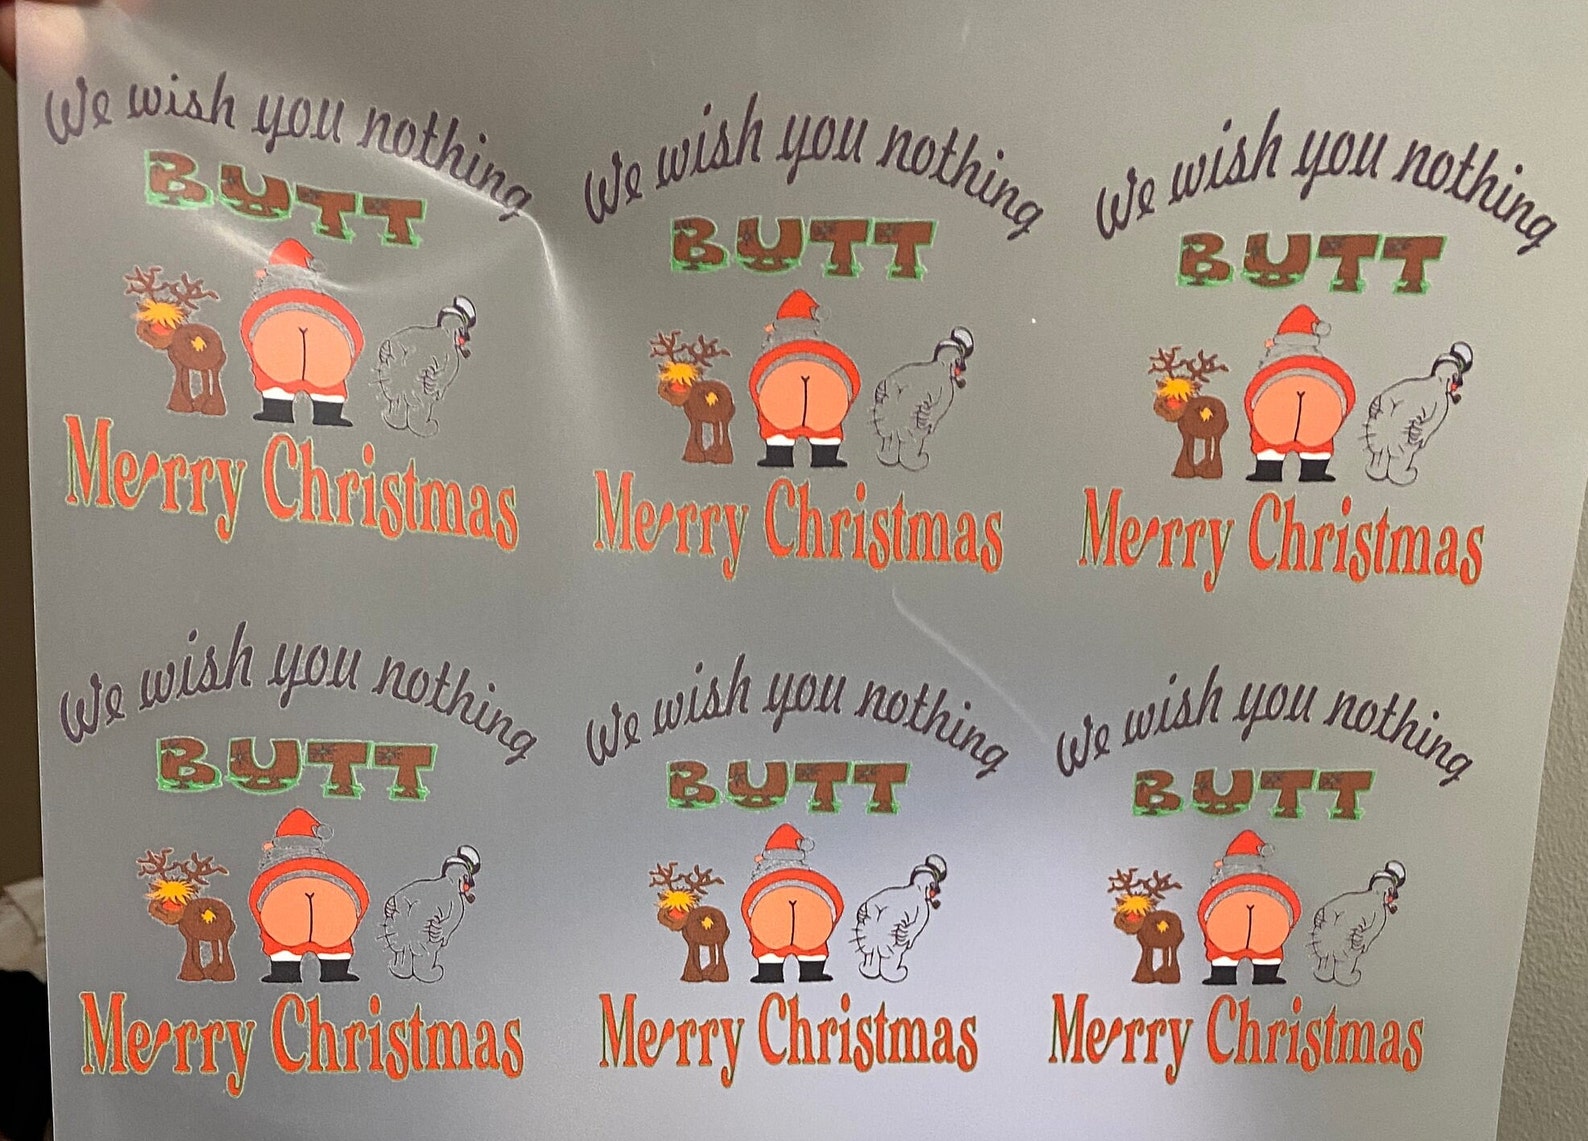 Stickers with Santa's ass.